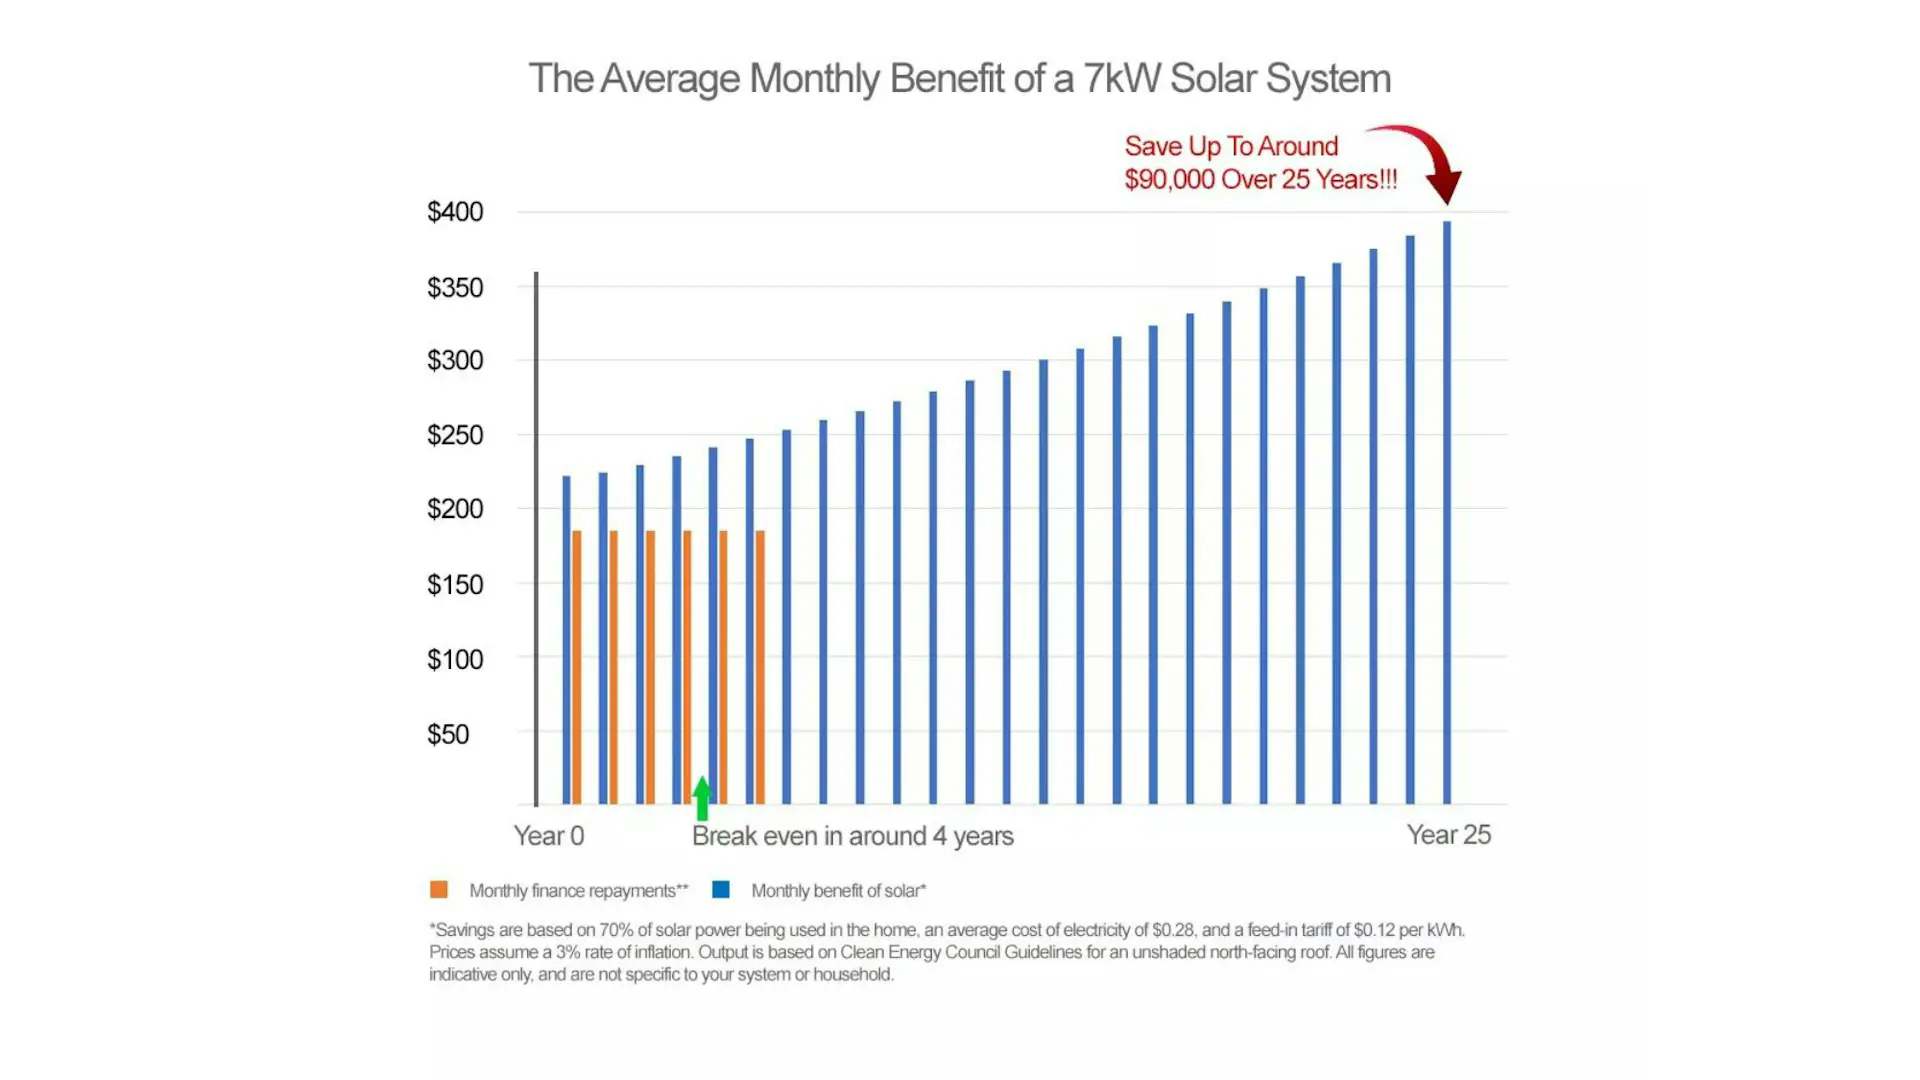 Average monthly benefit of a 7kW solar system